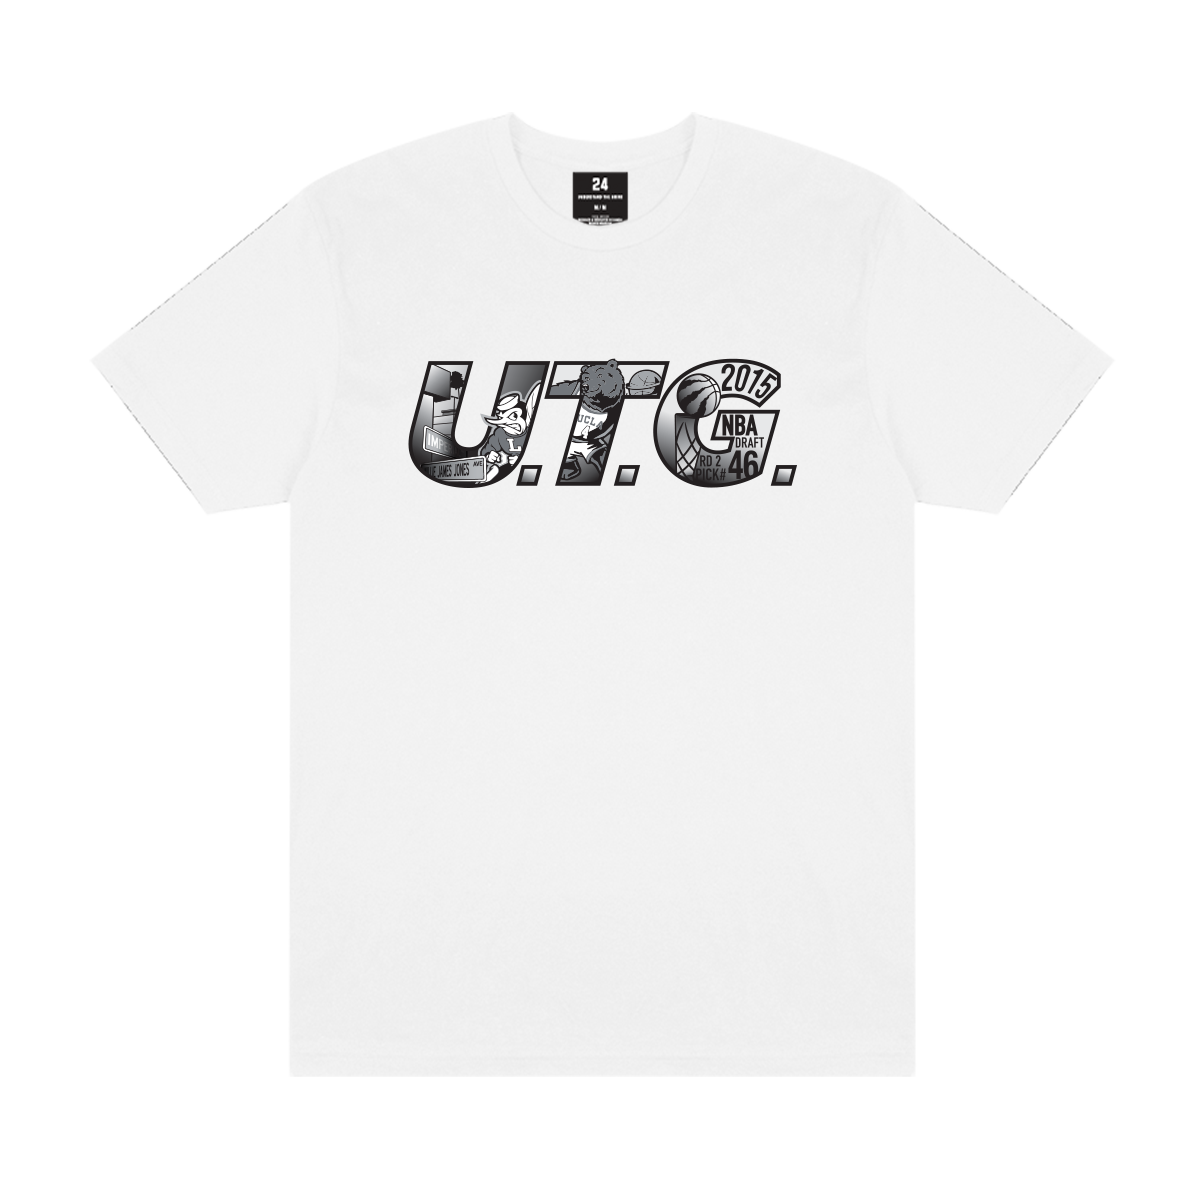 The Grind Continues - Tattoo Design Tee - White